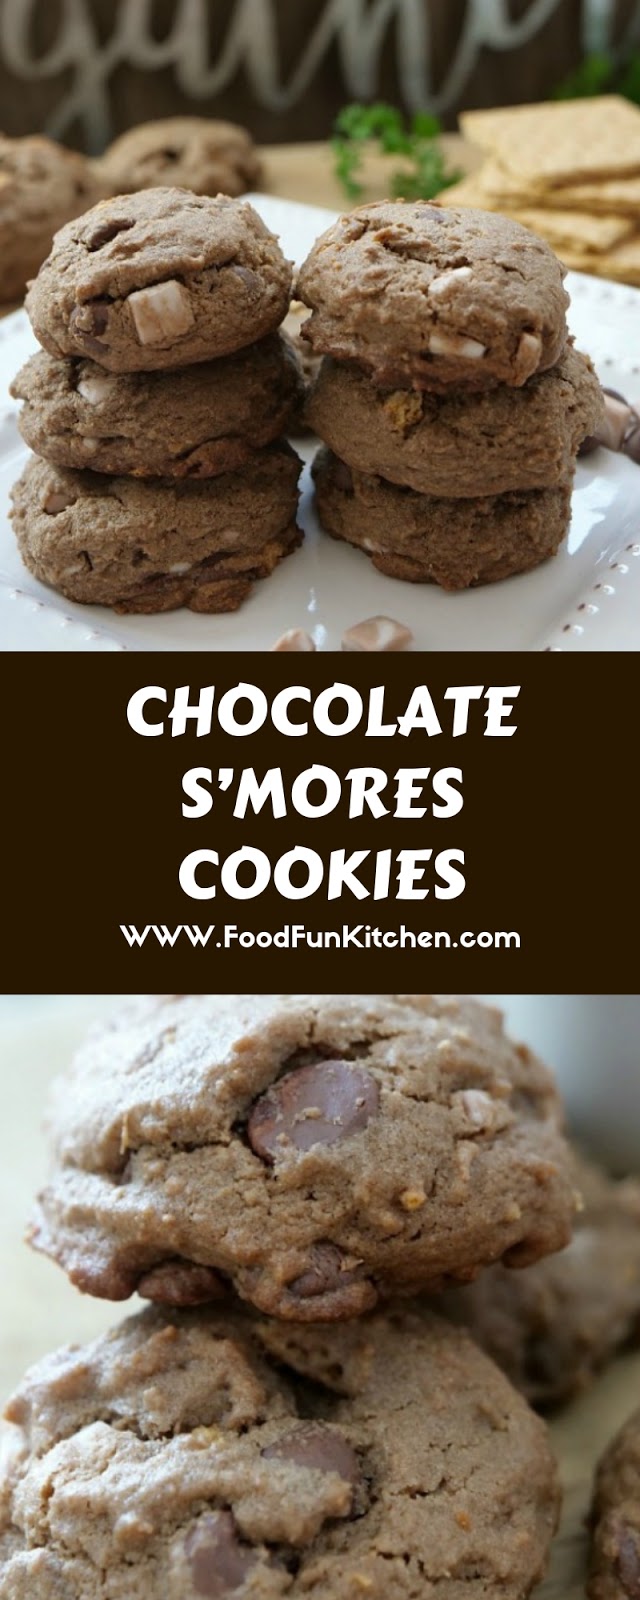 CHOCOLATE S’MORES COOKIES